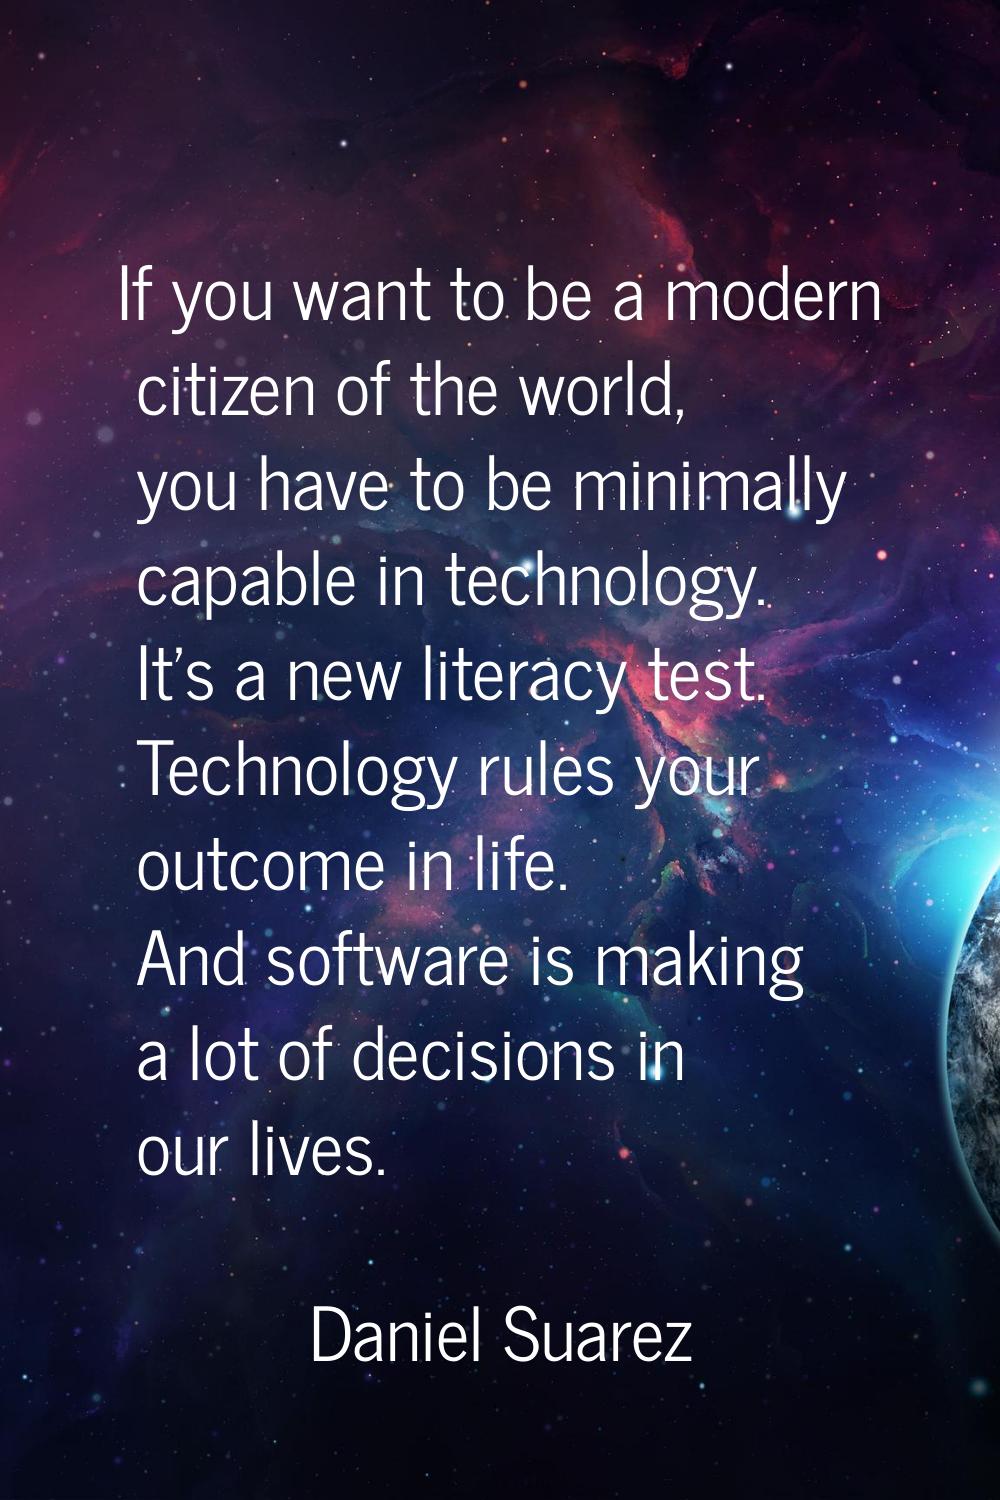 If you want to be a modern citizen of the world, you have to be minimally capable in technology. It